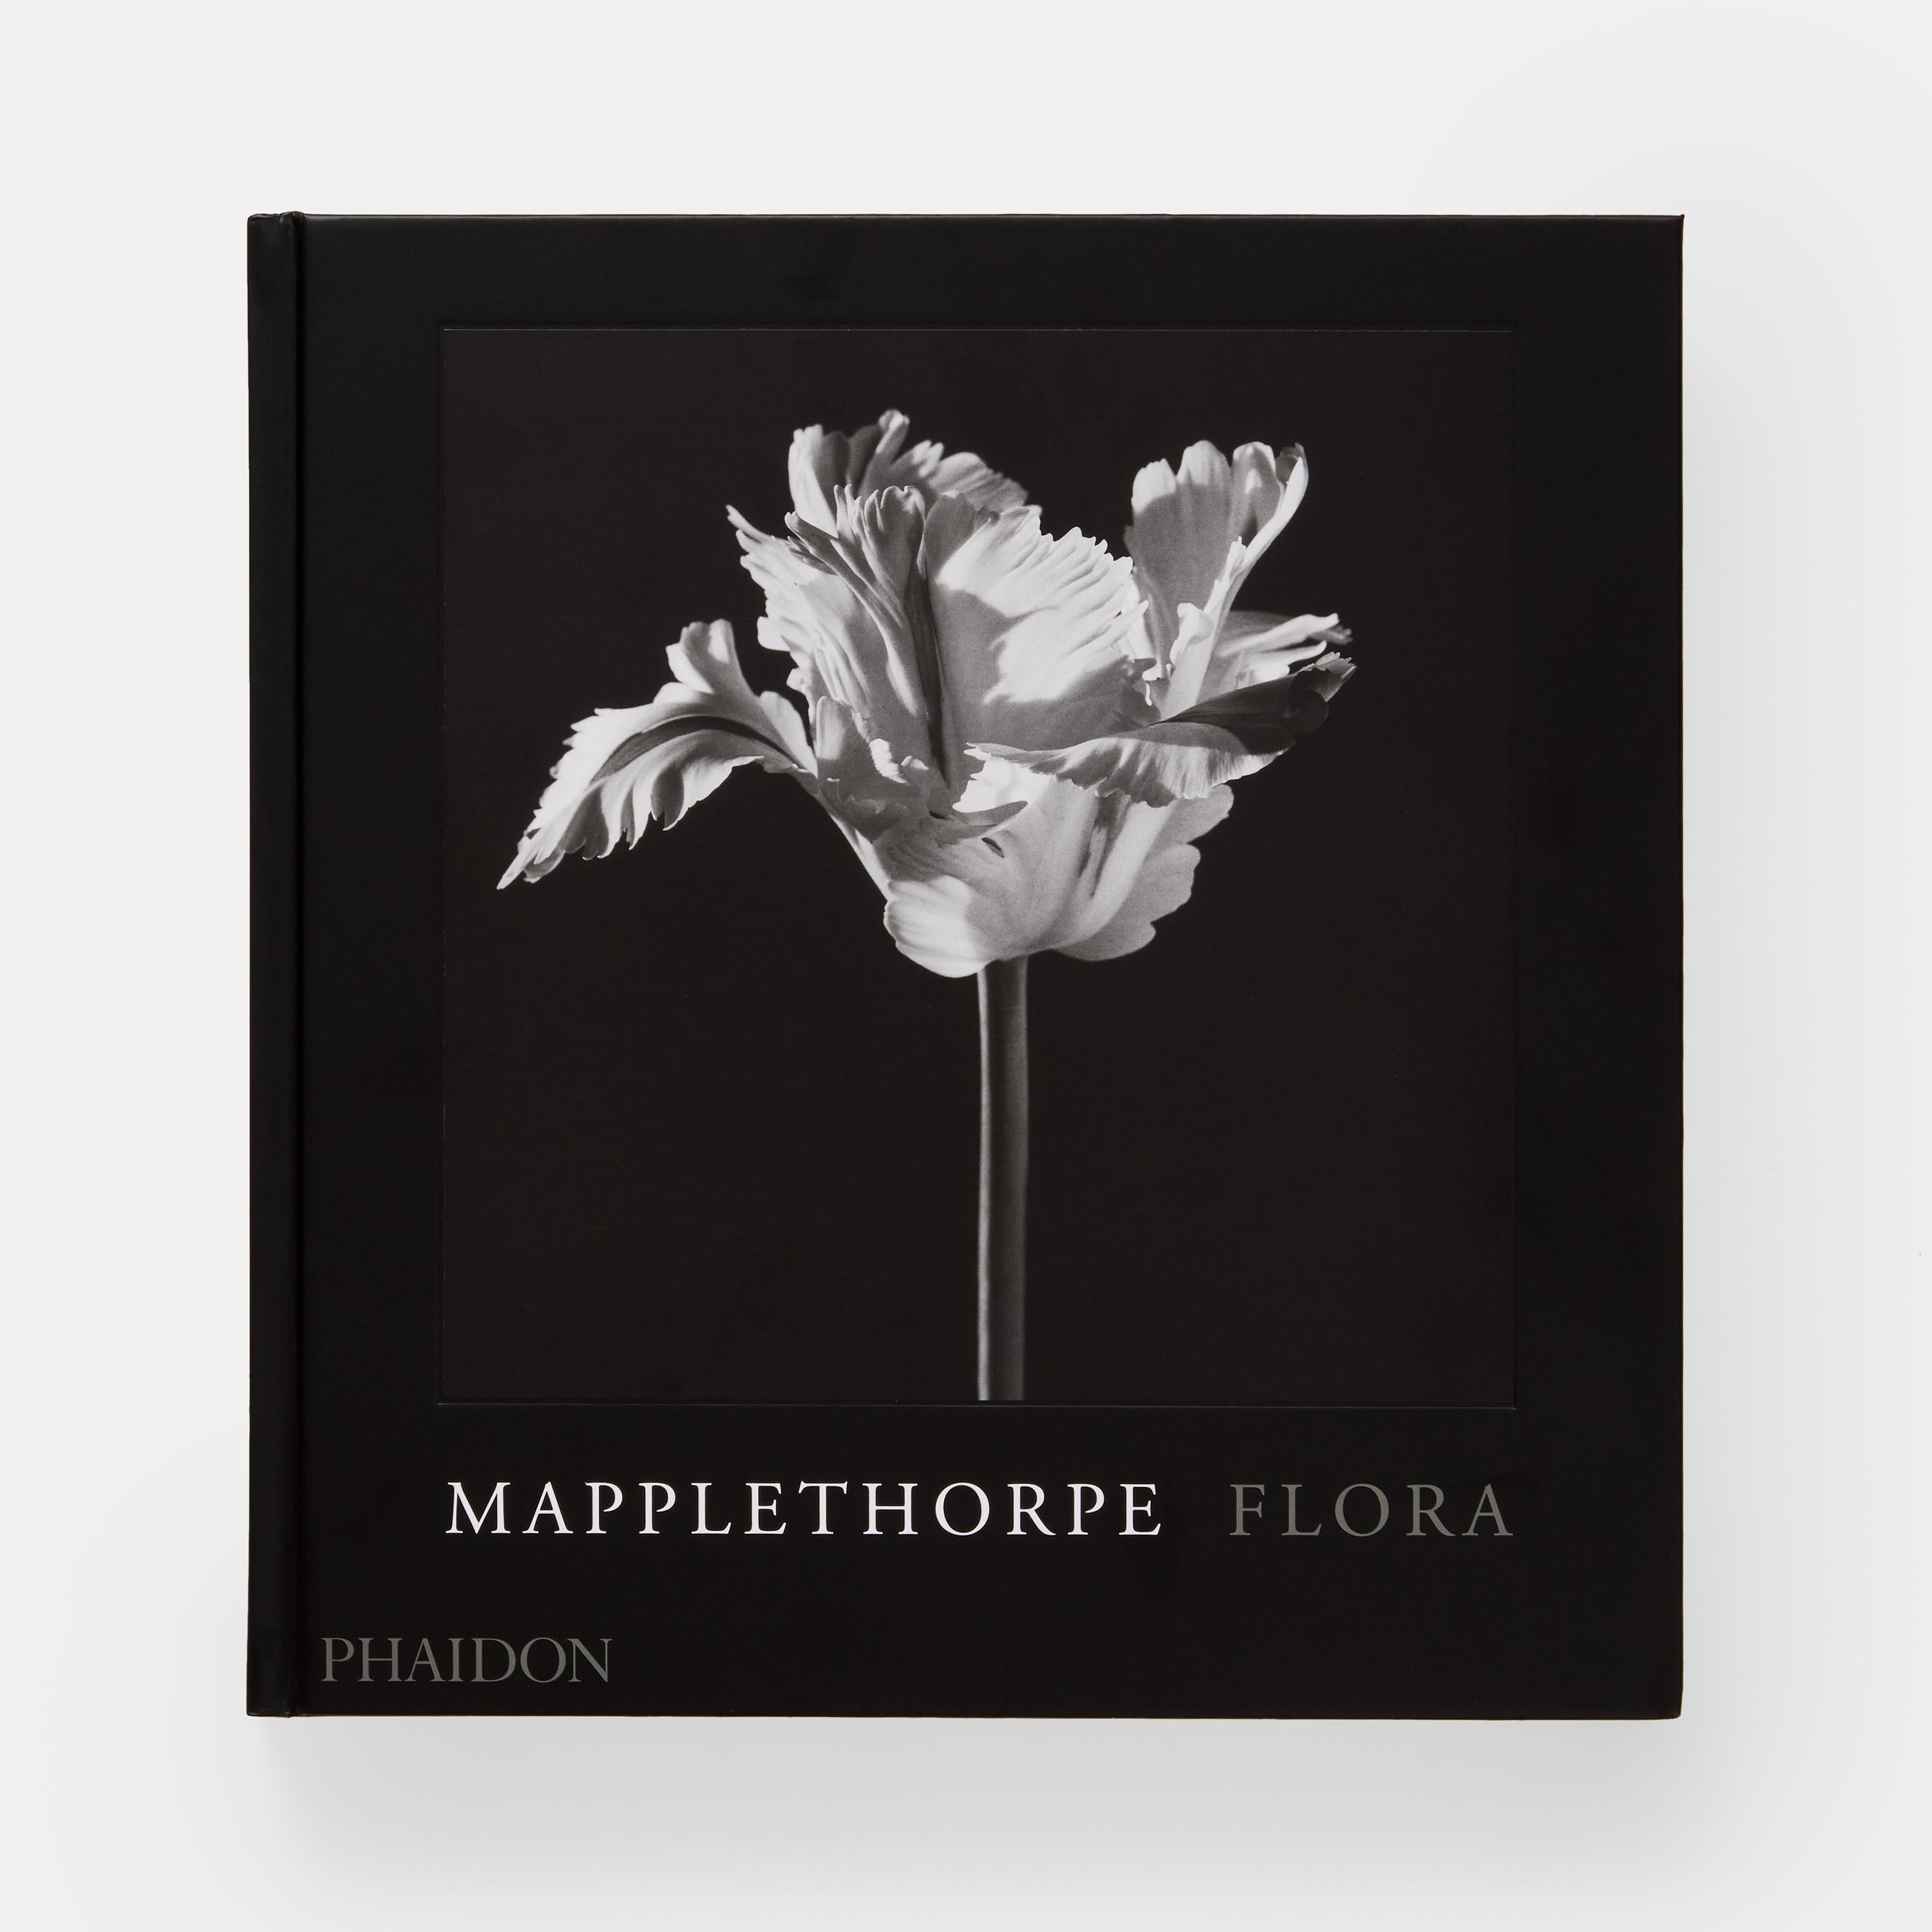 The definitive collection of Robert Mapplethorpe’s flower photographs in a sophisticated new edition

Robert Mapplethorpe is one of the twentieth century’s most important artists, known for his ground-breaking and provocative work. He studied